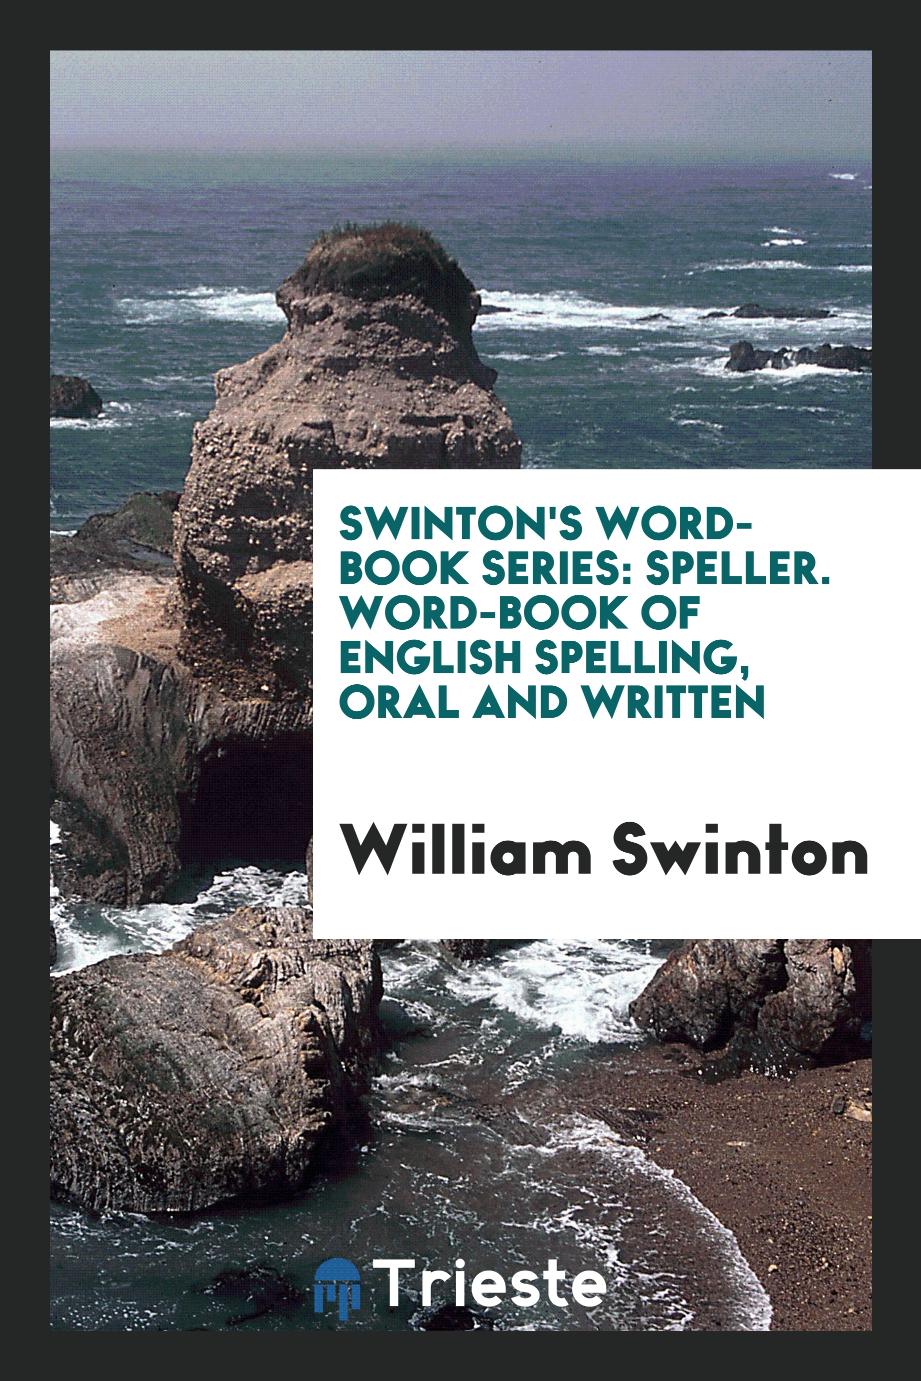 Swinton's Word-Book Series: Speller. Word-Book of English Spelling, Oral and Written